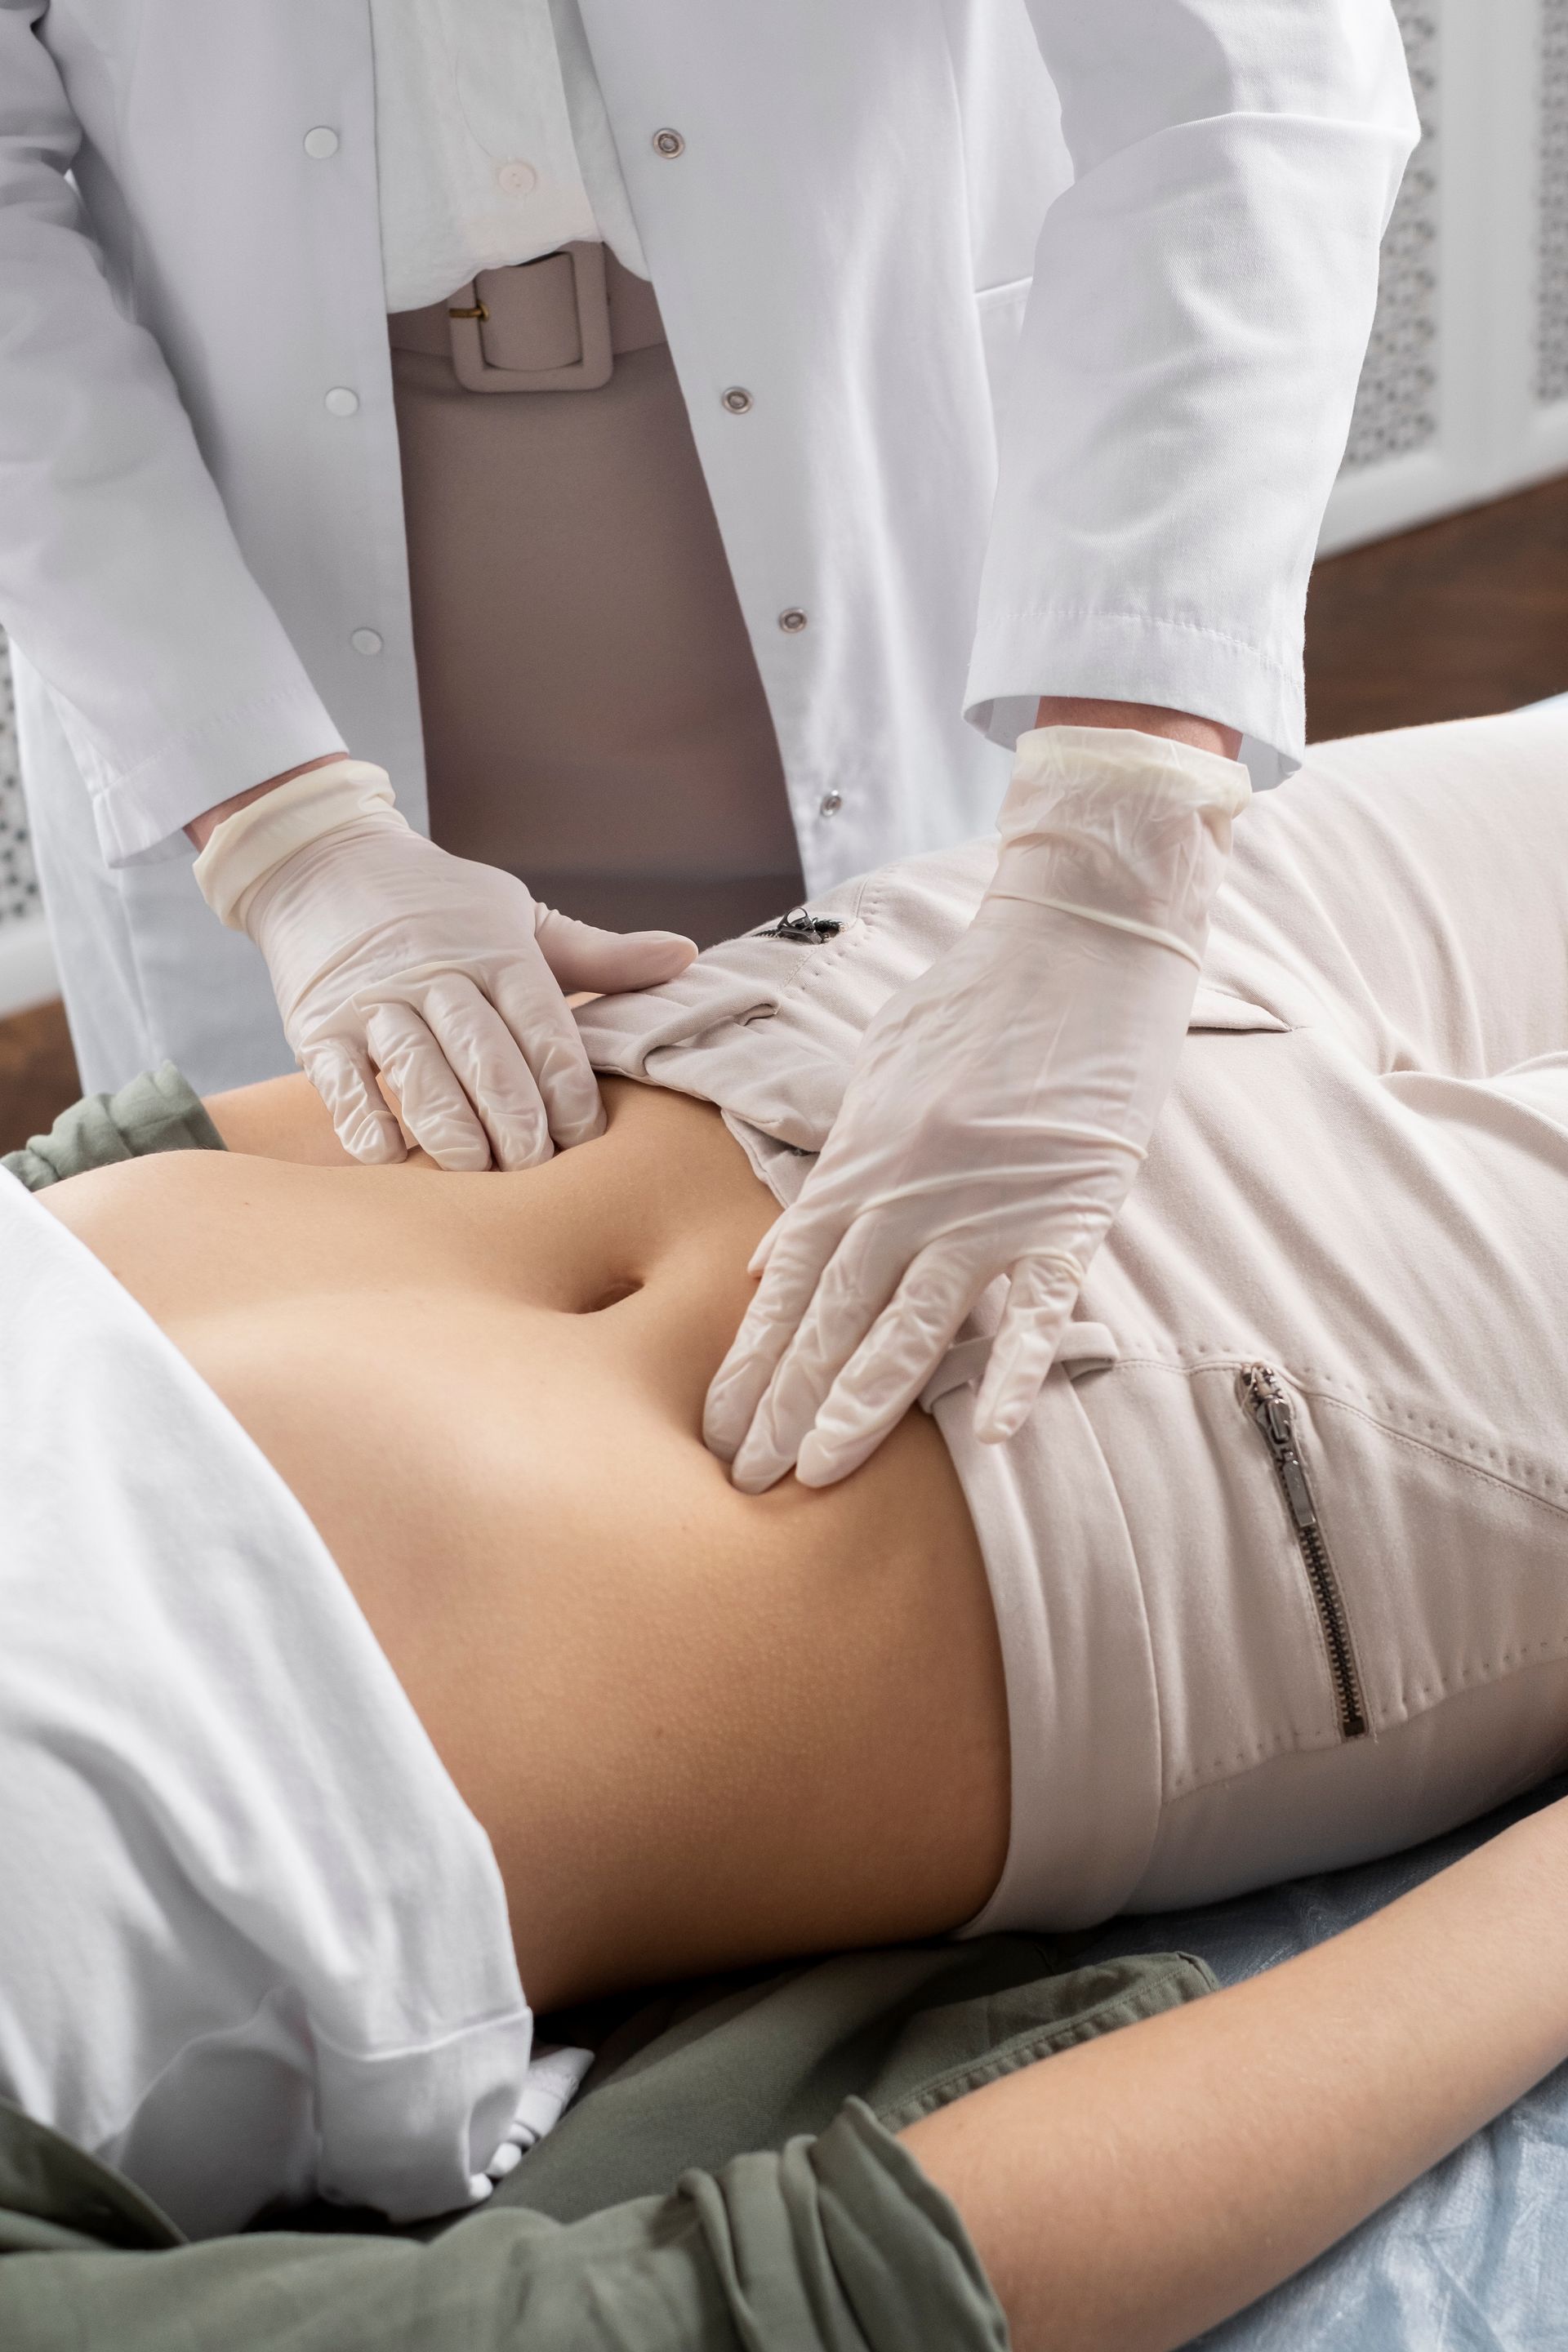 A woman is laying on a bed while a doctor examines her stomach.